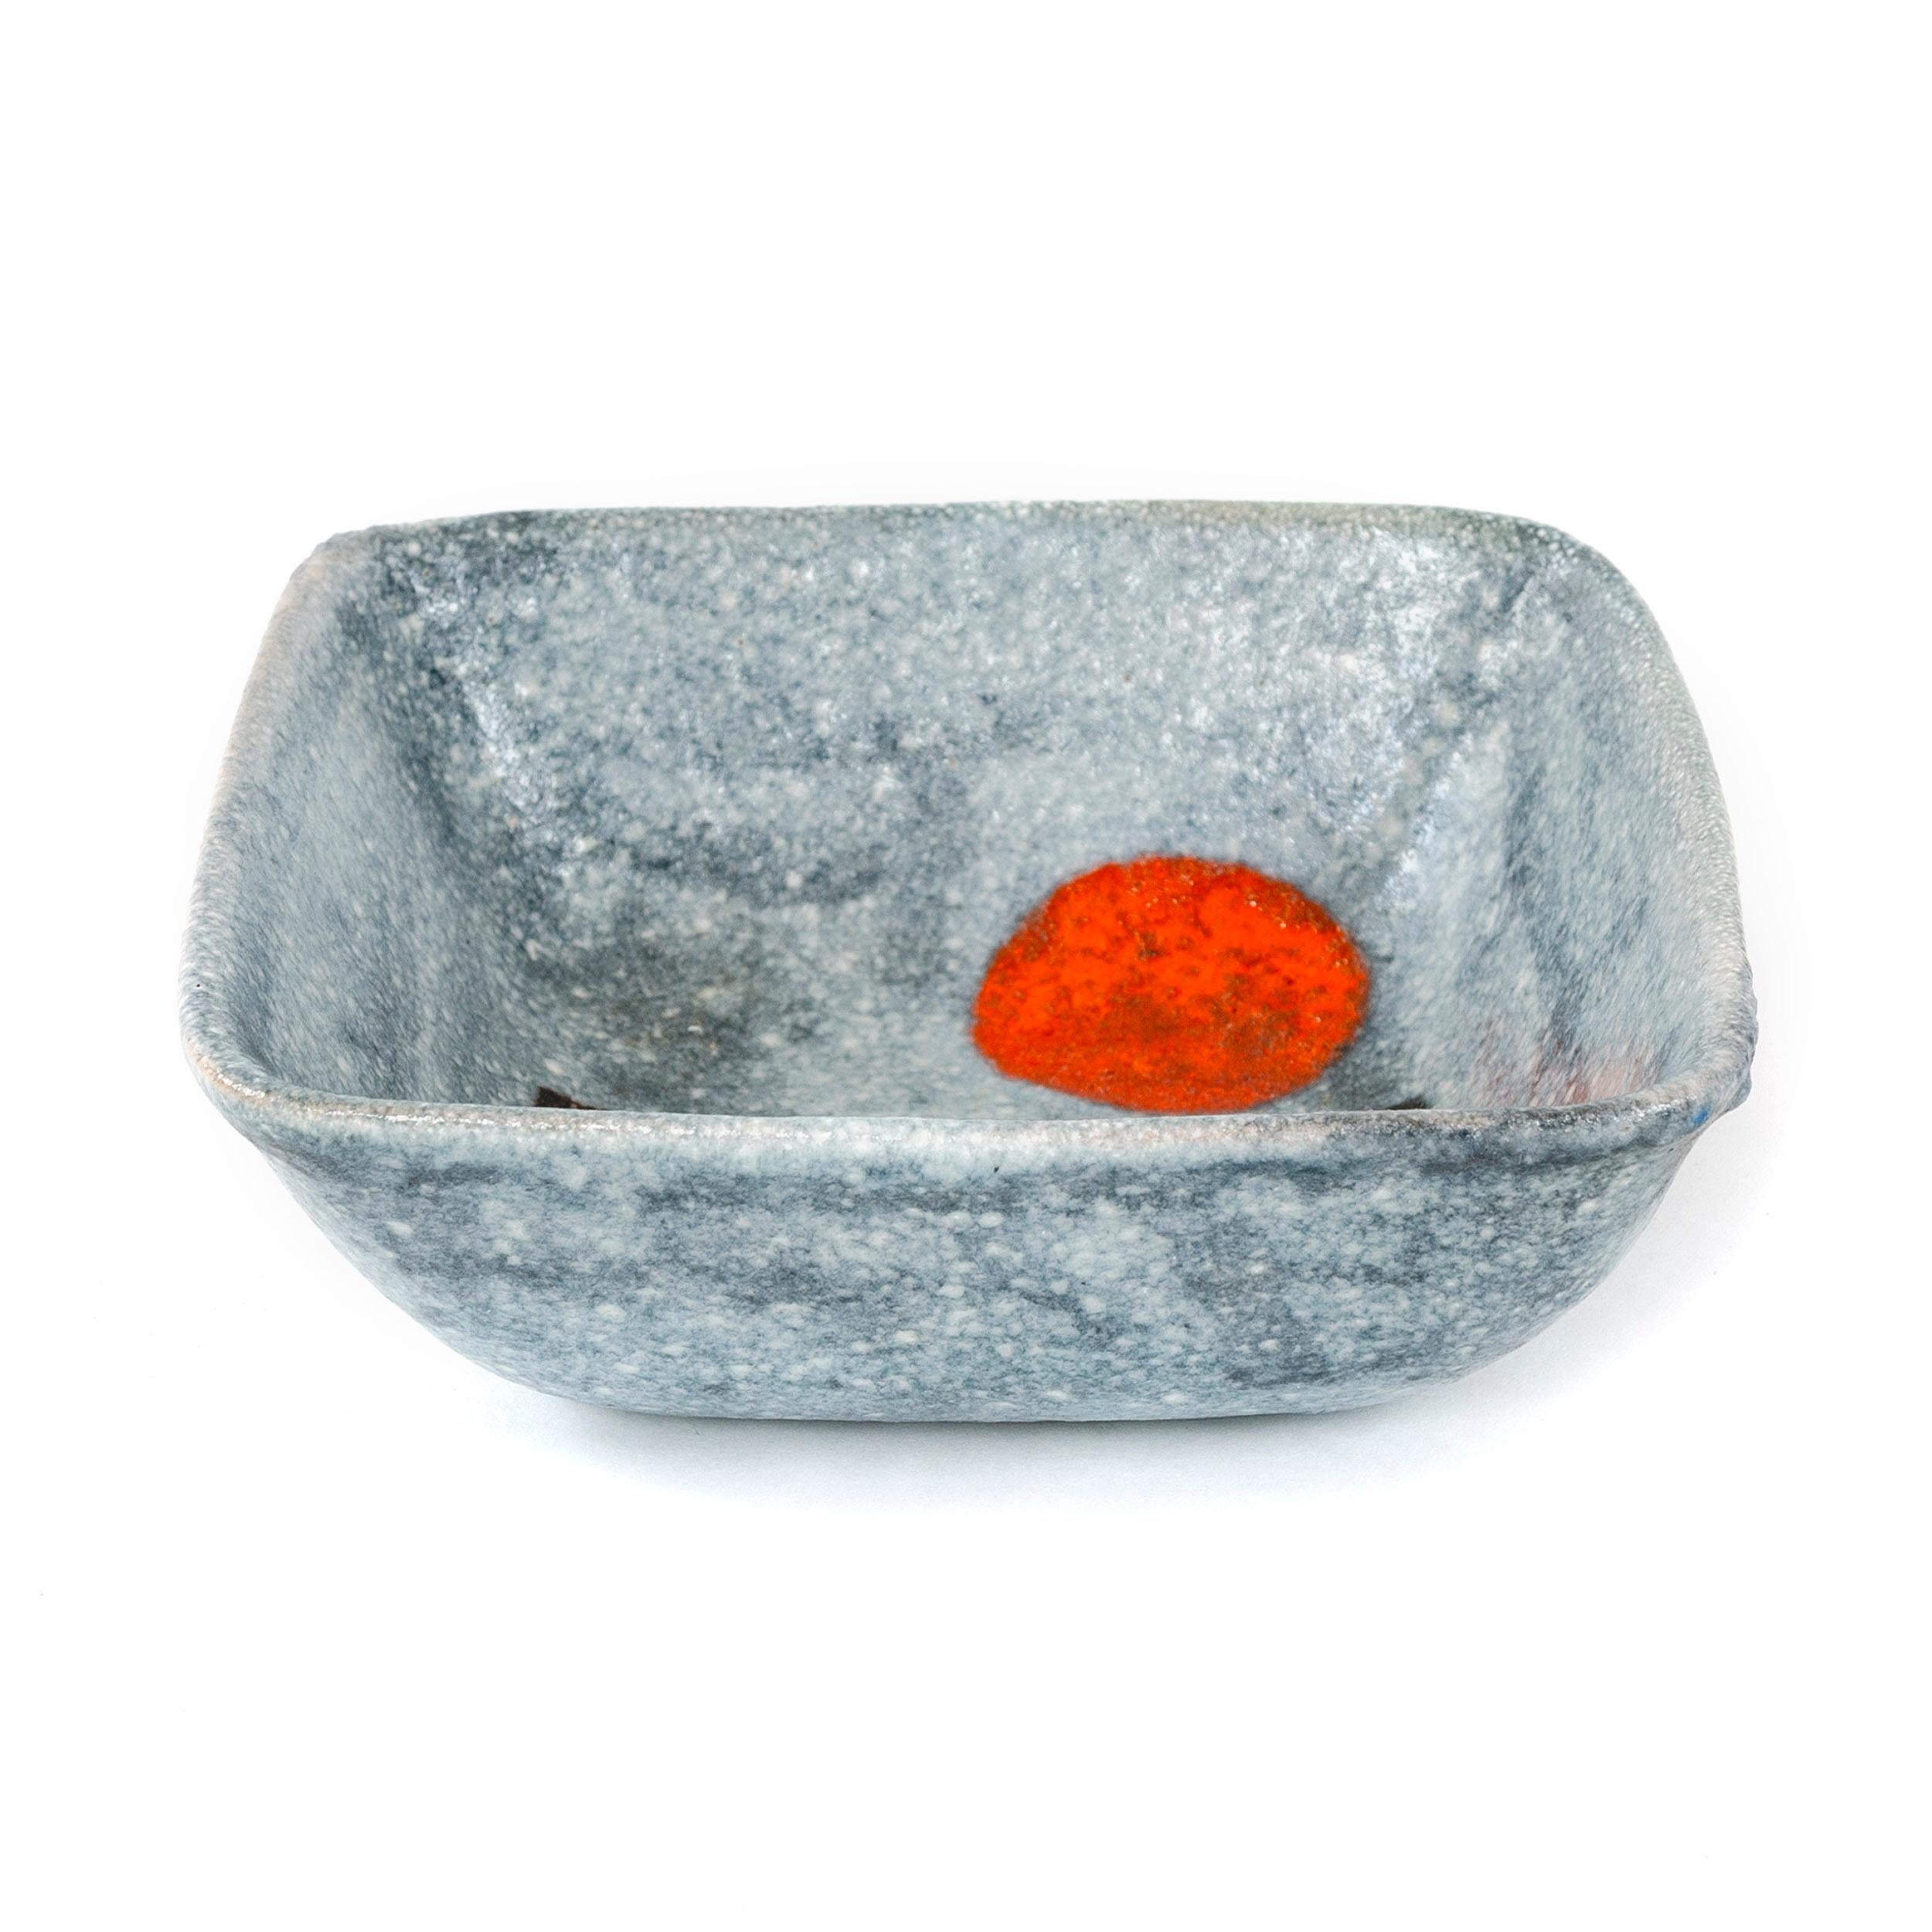 Proportionately deep walled ceramic bowl in a light gray glaze with contrasting decoration consisting of brightly colored geometric shapes. Donkey signed on back.